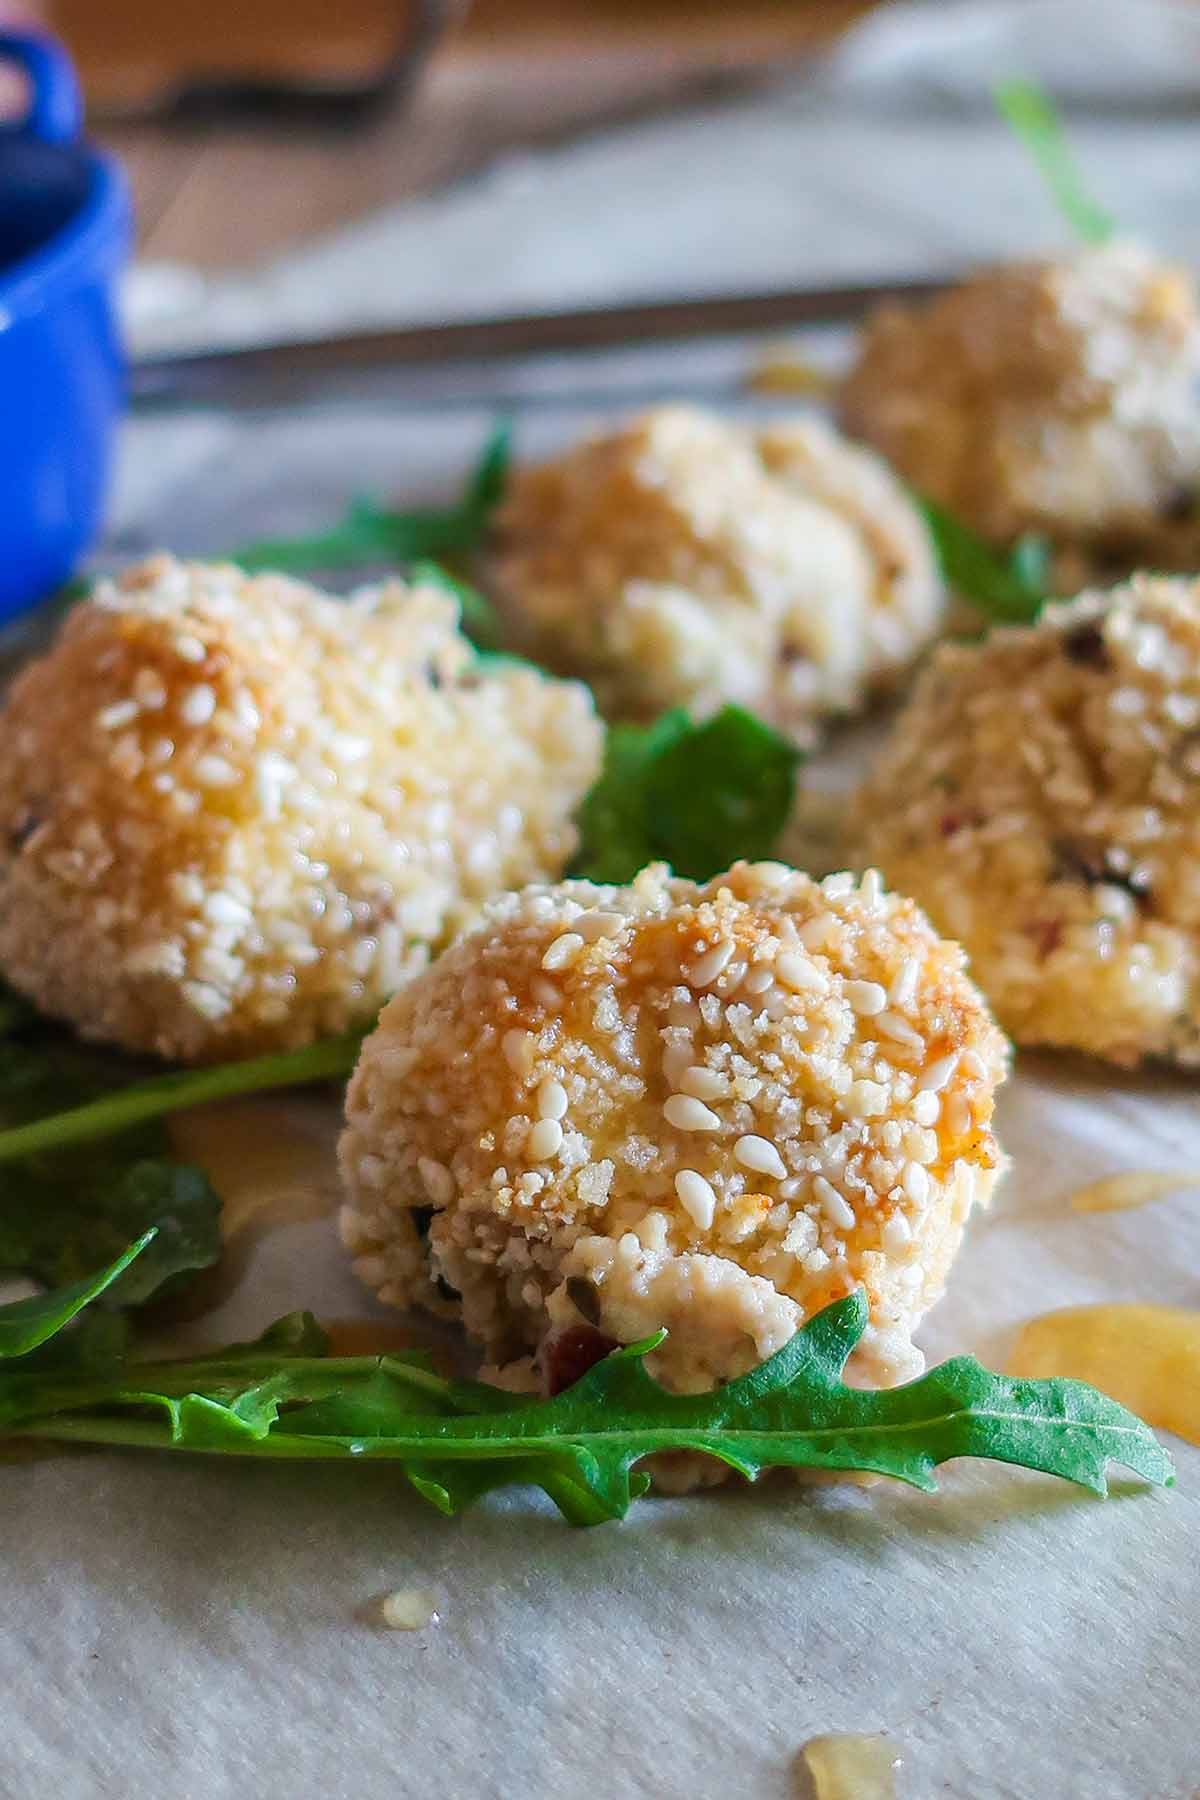 gluten free baked goat cheese and cranberry balls on greens